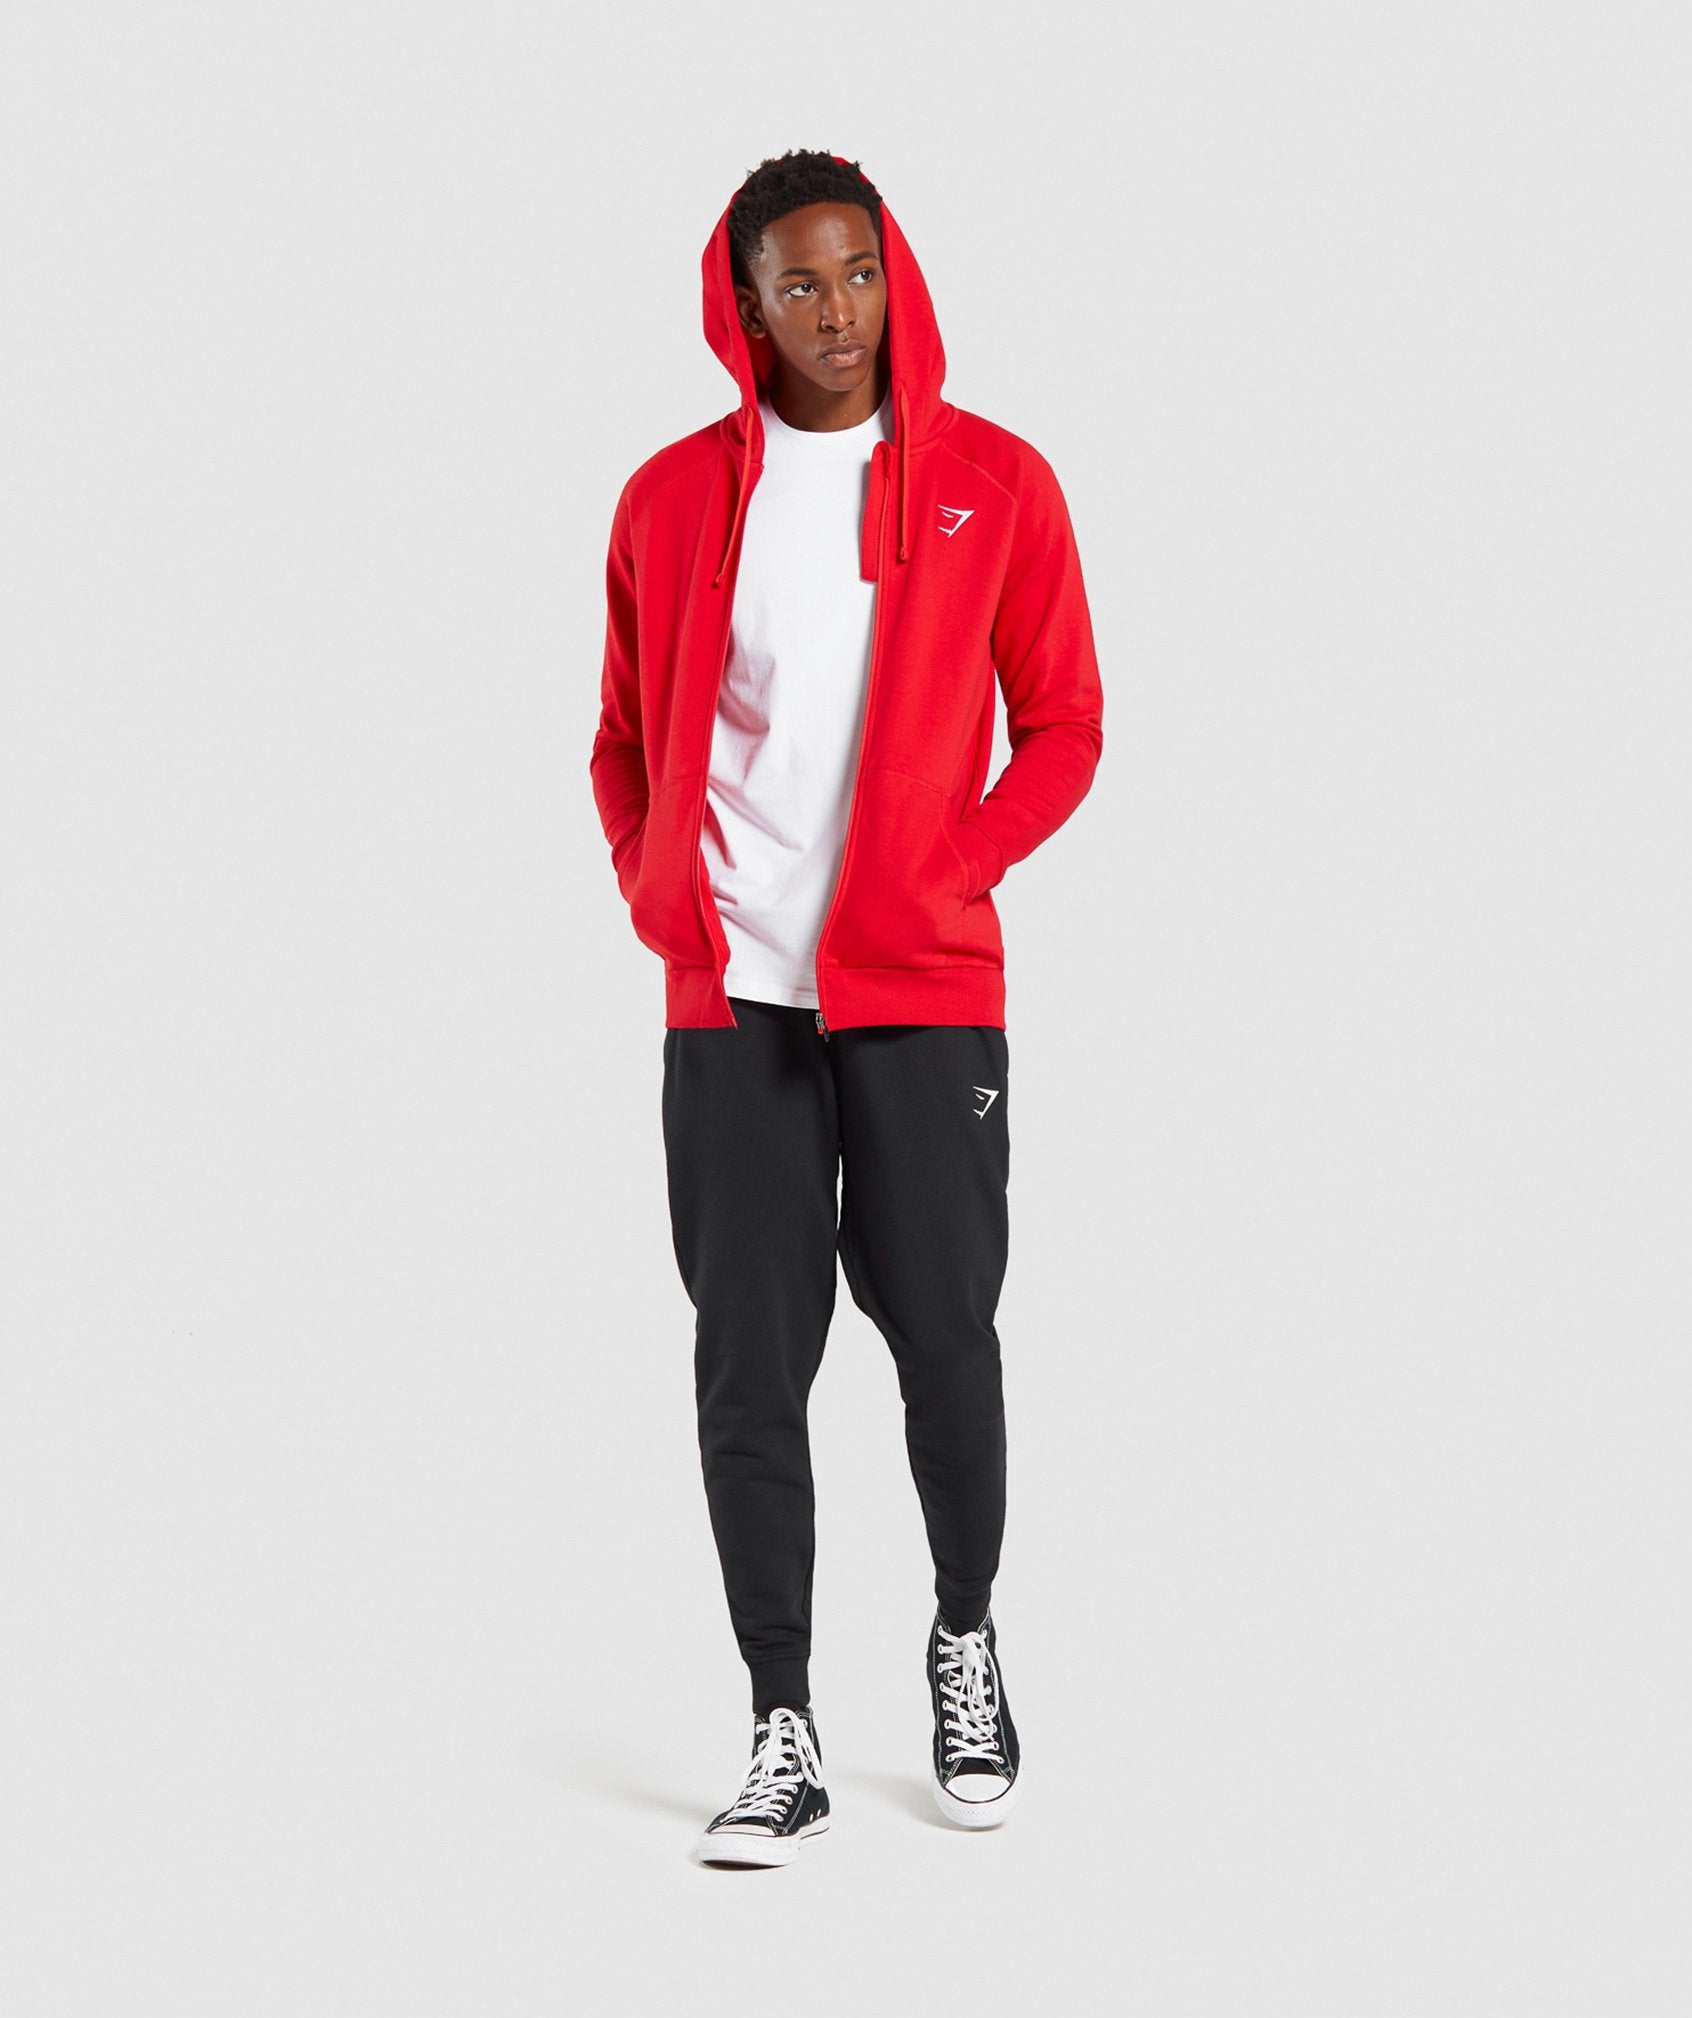 Crest Zip Up Hoodie in Red - view 4